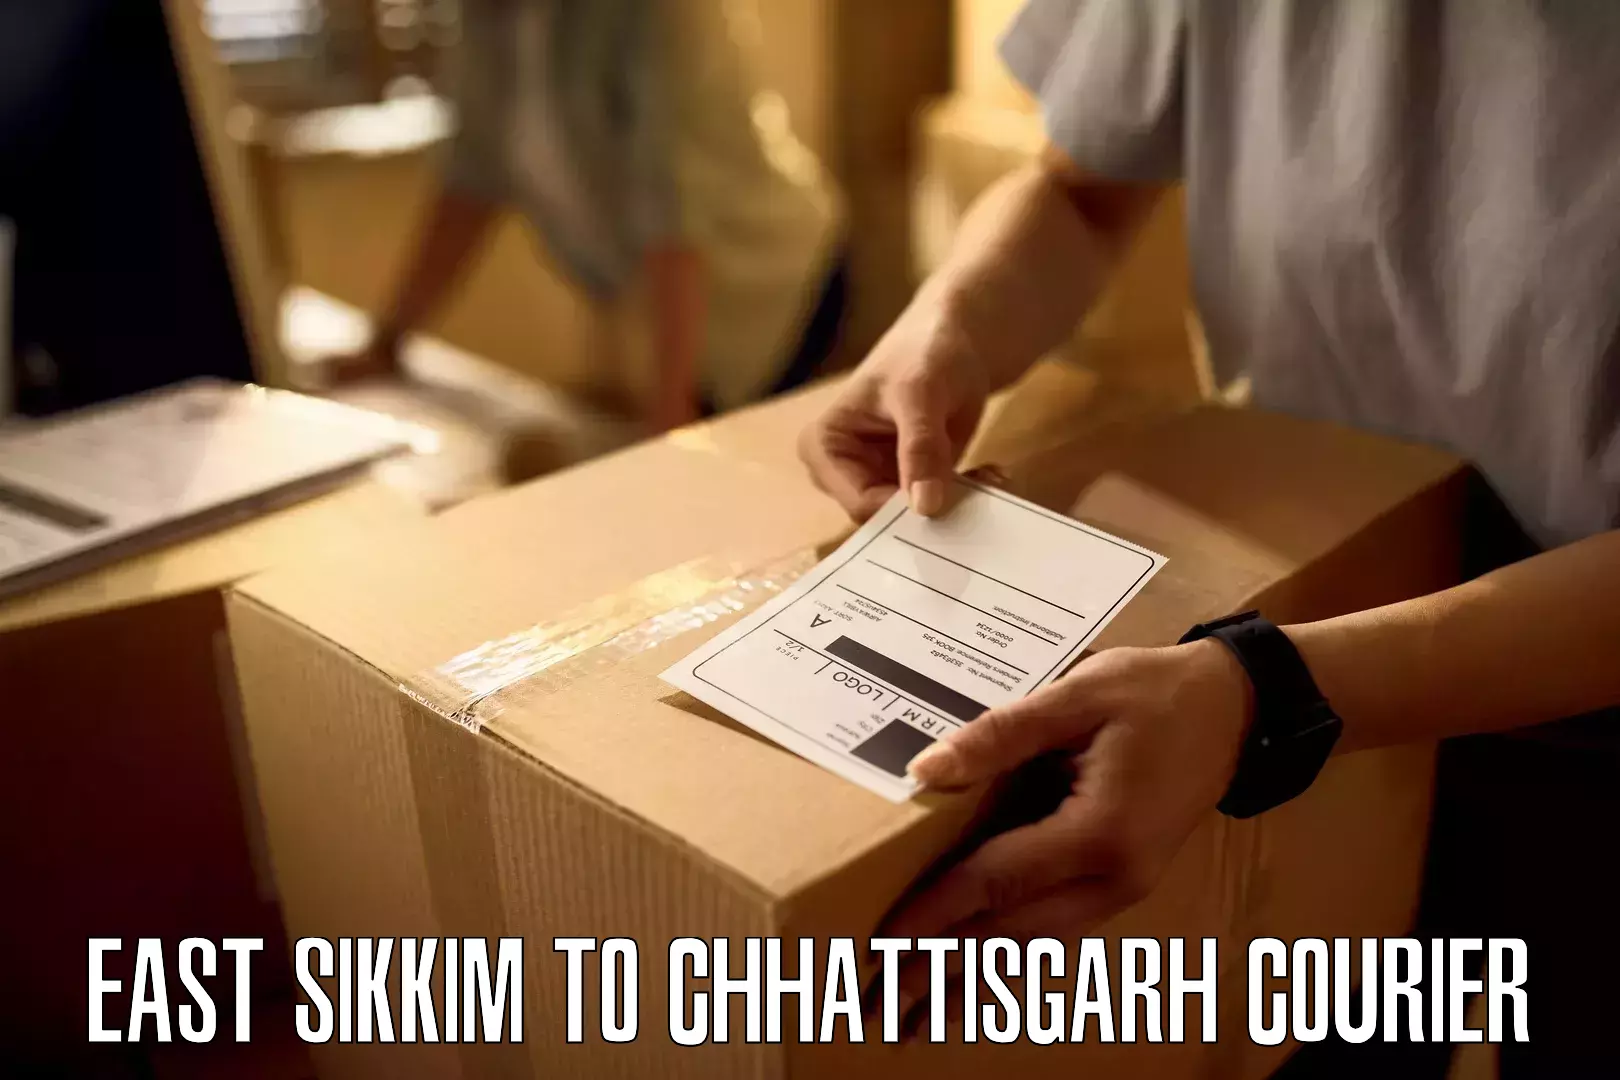 On-call courier service East Sikkim to Chhattisgarh